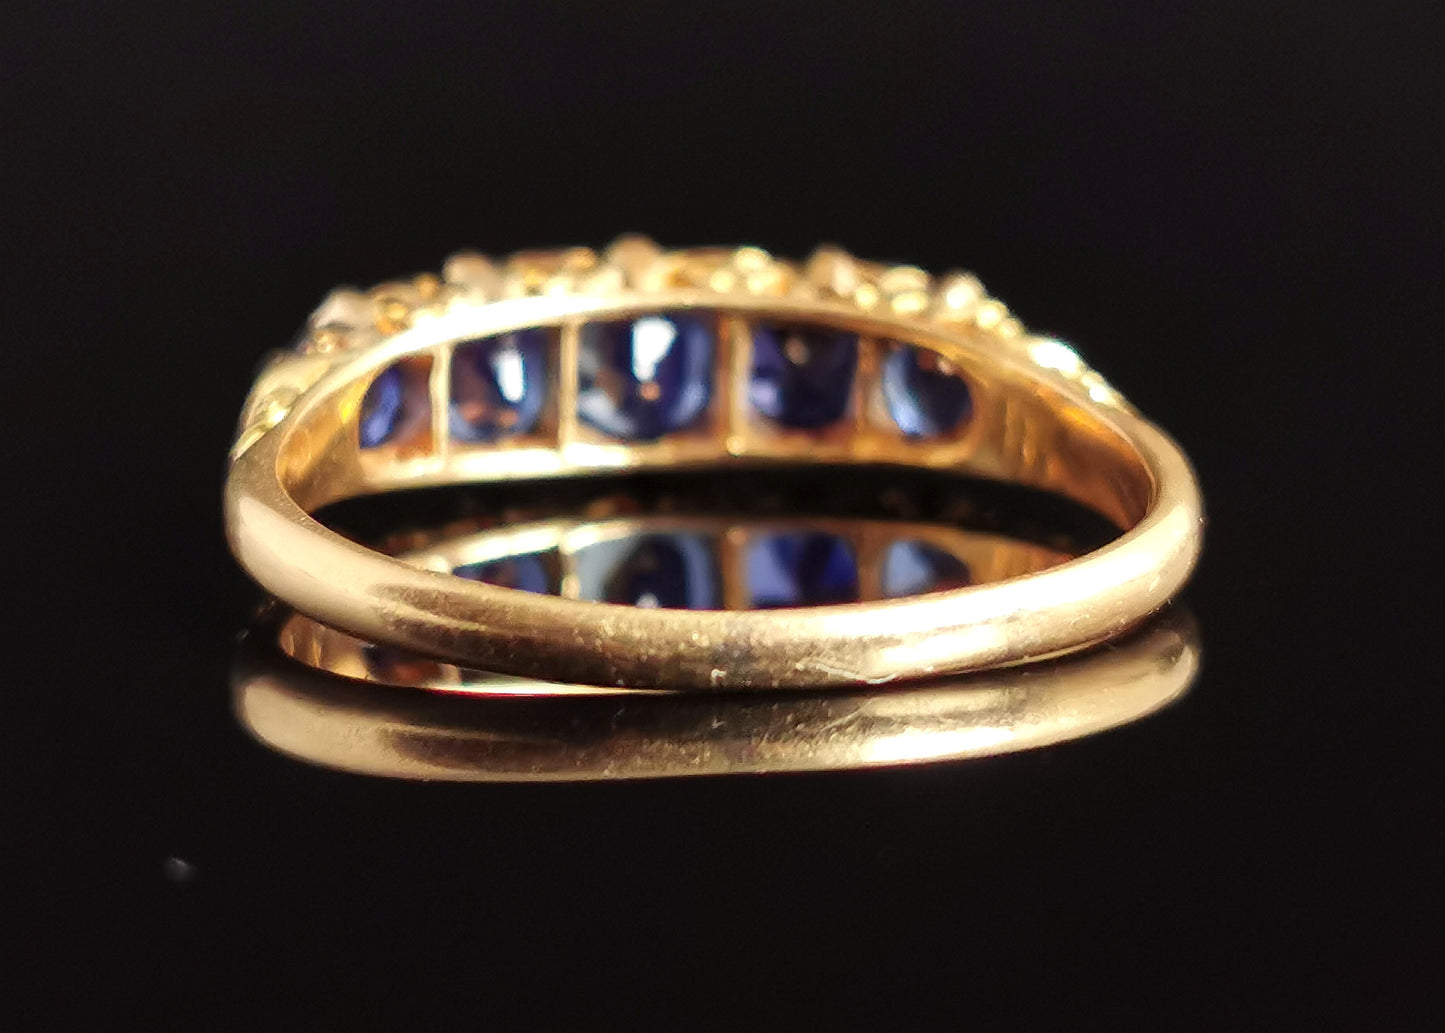 Antique Sapphire and diamond five stone ring, 18ct gold, Victorian